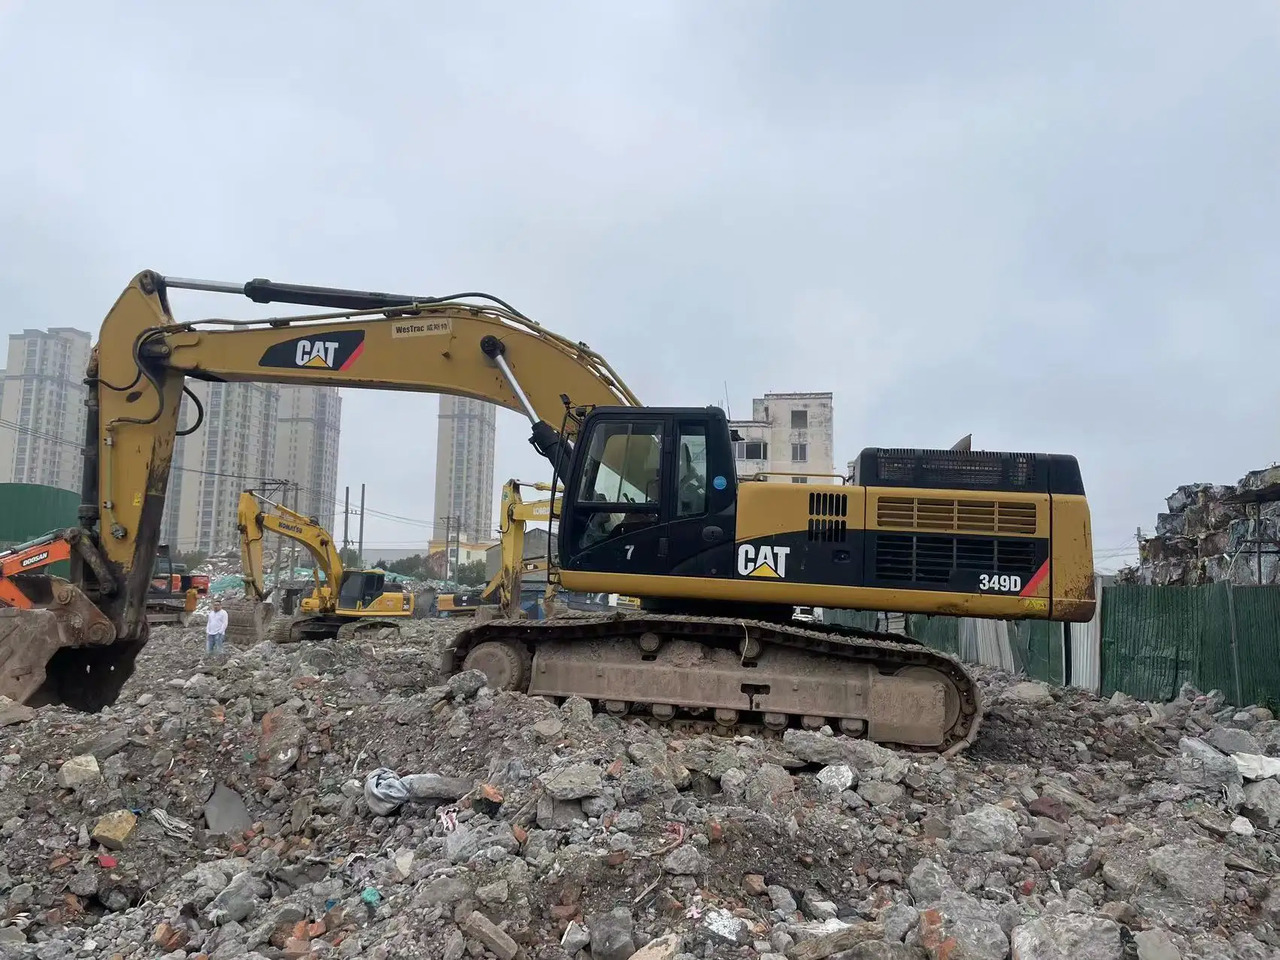 Heavy Duty Caterpillar Digging Machinery Excellent Working Condition Used Cat 349d Excavator In Shanghai lizingą Heavy Duty Caterpillar Digging Machinery Excellent Working Condition Used Cat 349d Excavator In Shanghai: foto 6